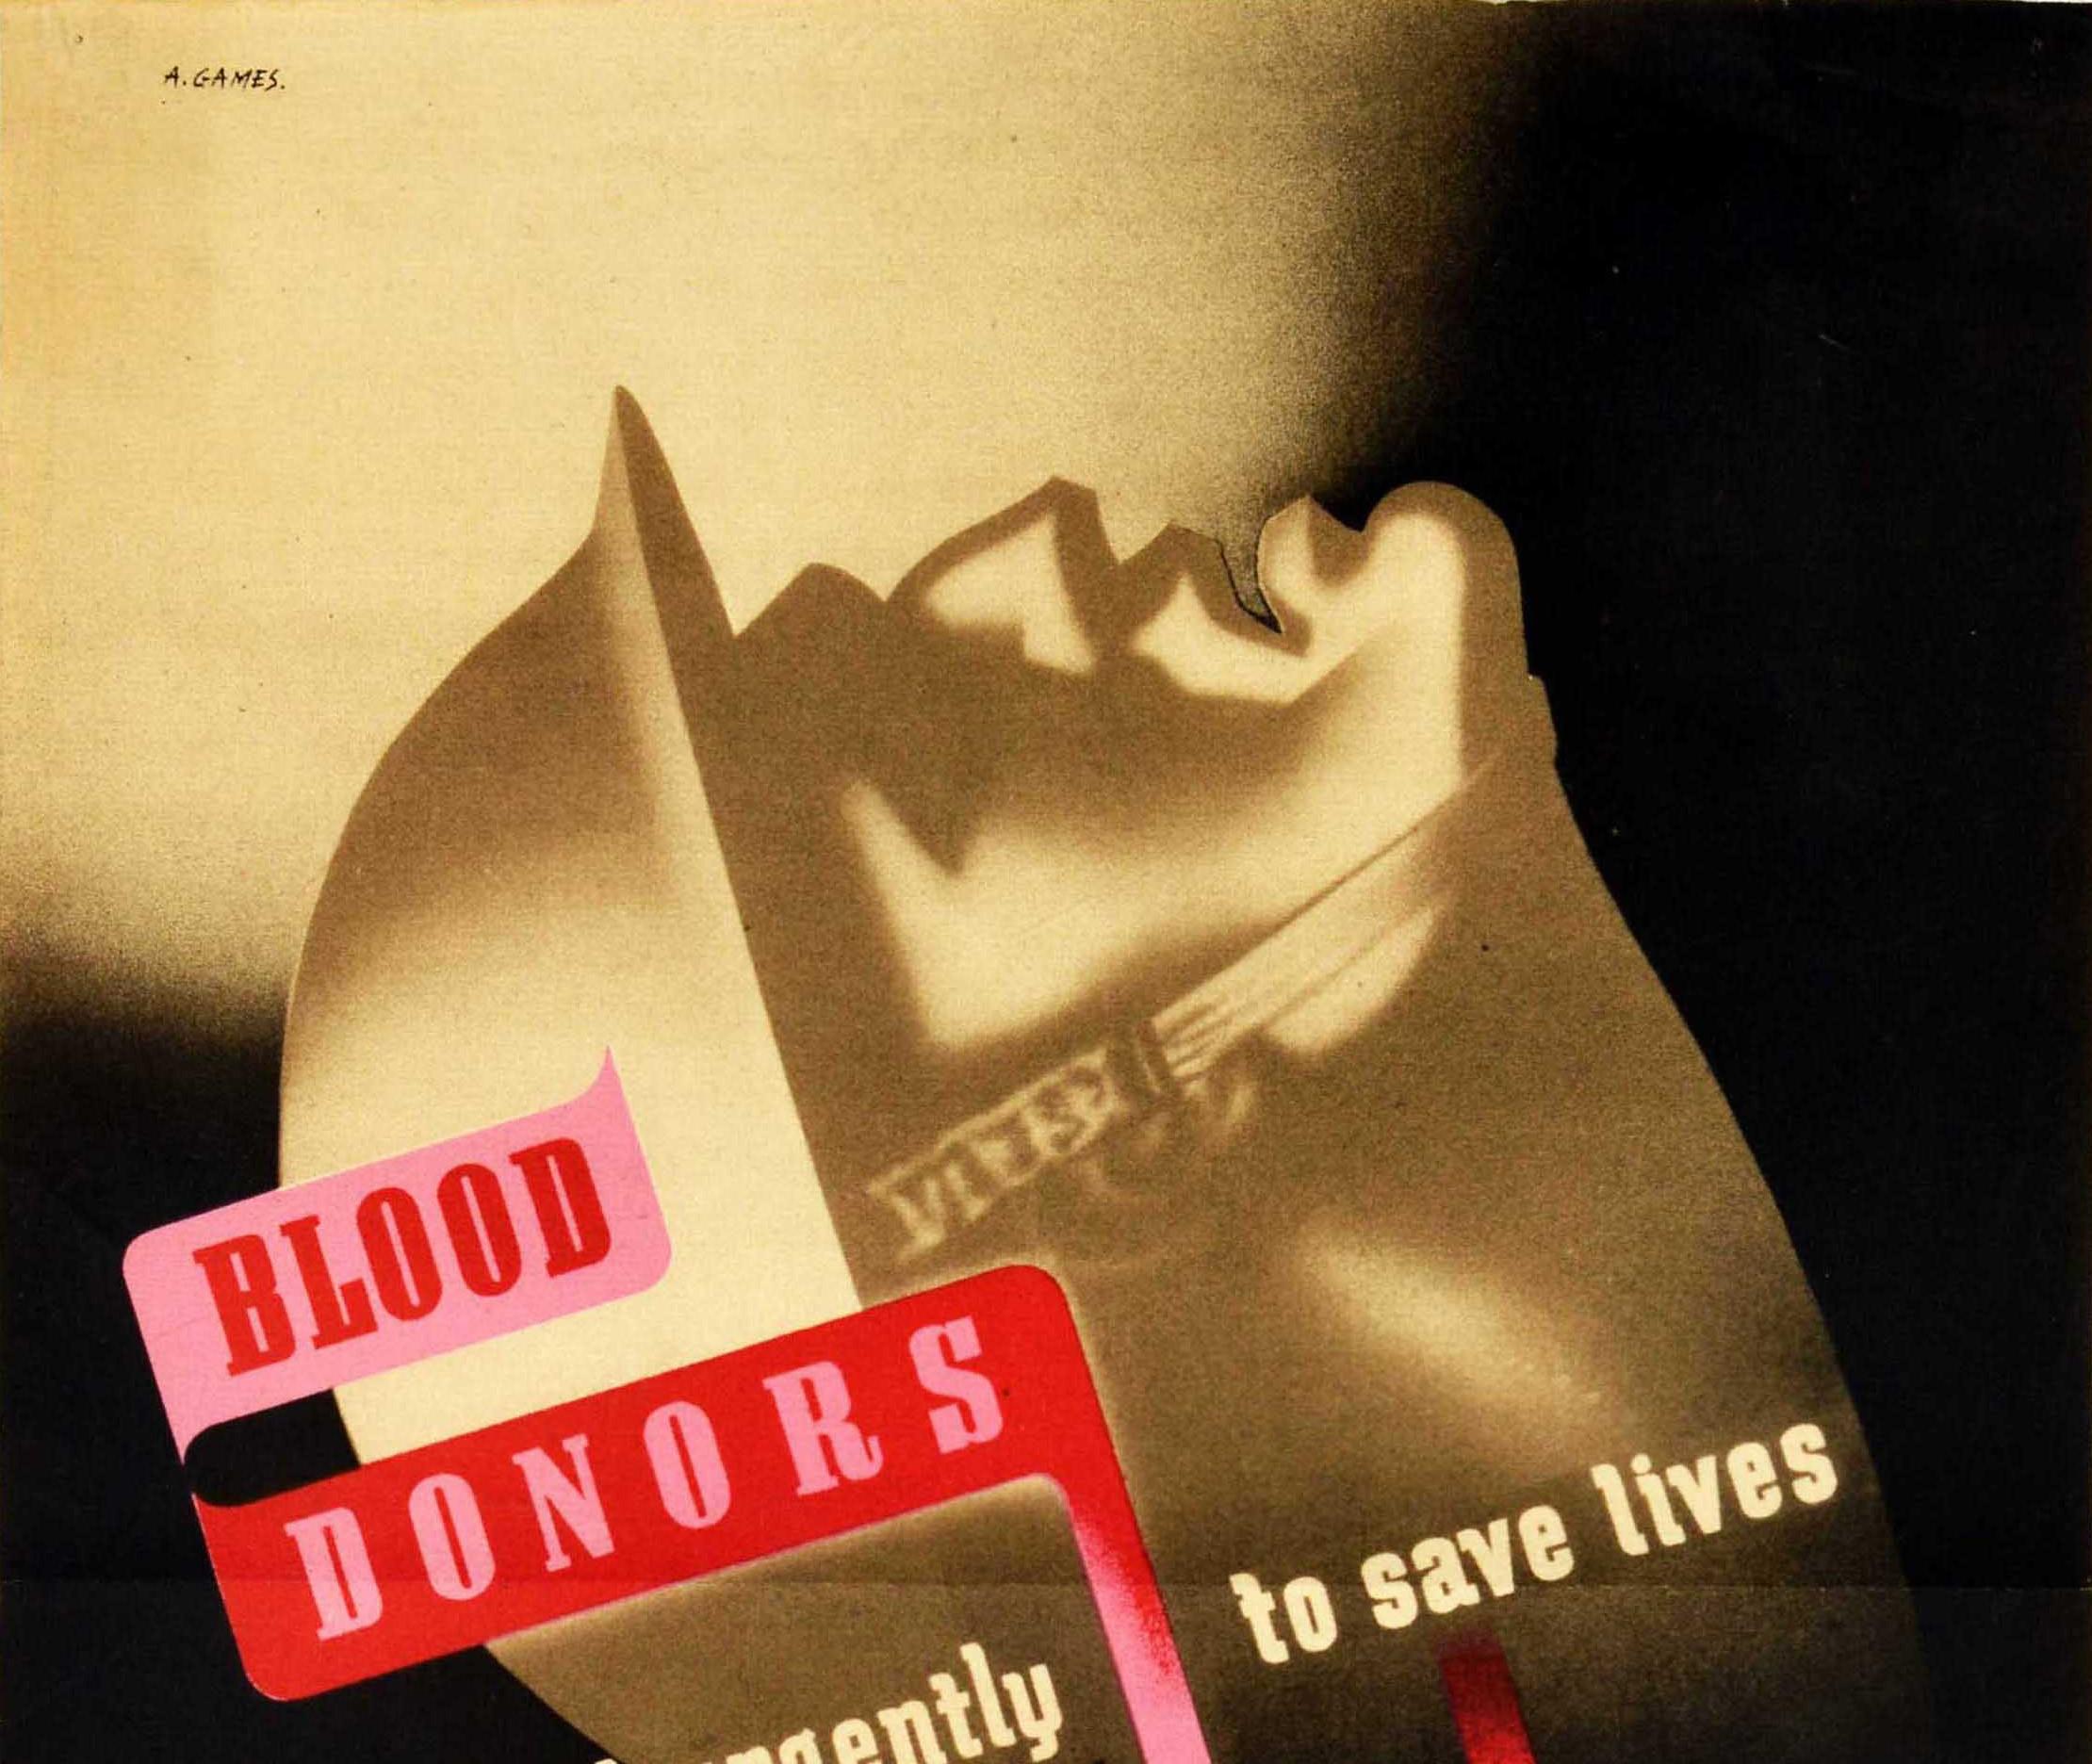 Original vintage World War Two poster - Blood donors are needed urgently to save lives Emergency blood transfusion service - featuring a modernist design by the notable British graphic designer Abram Games (Abraham Gamse; 1914-1996) depicting a